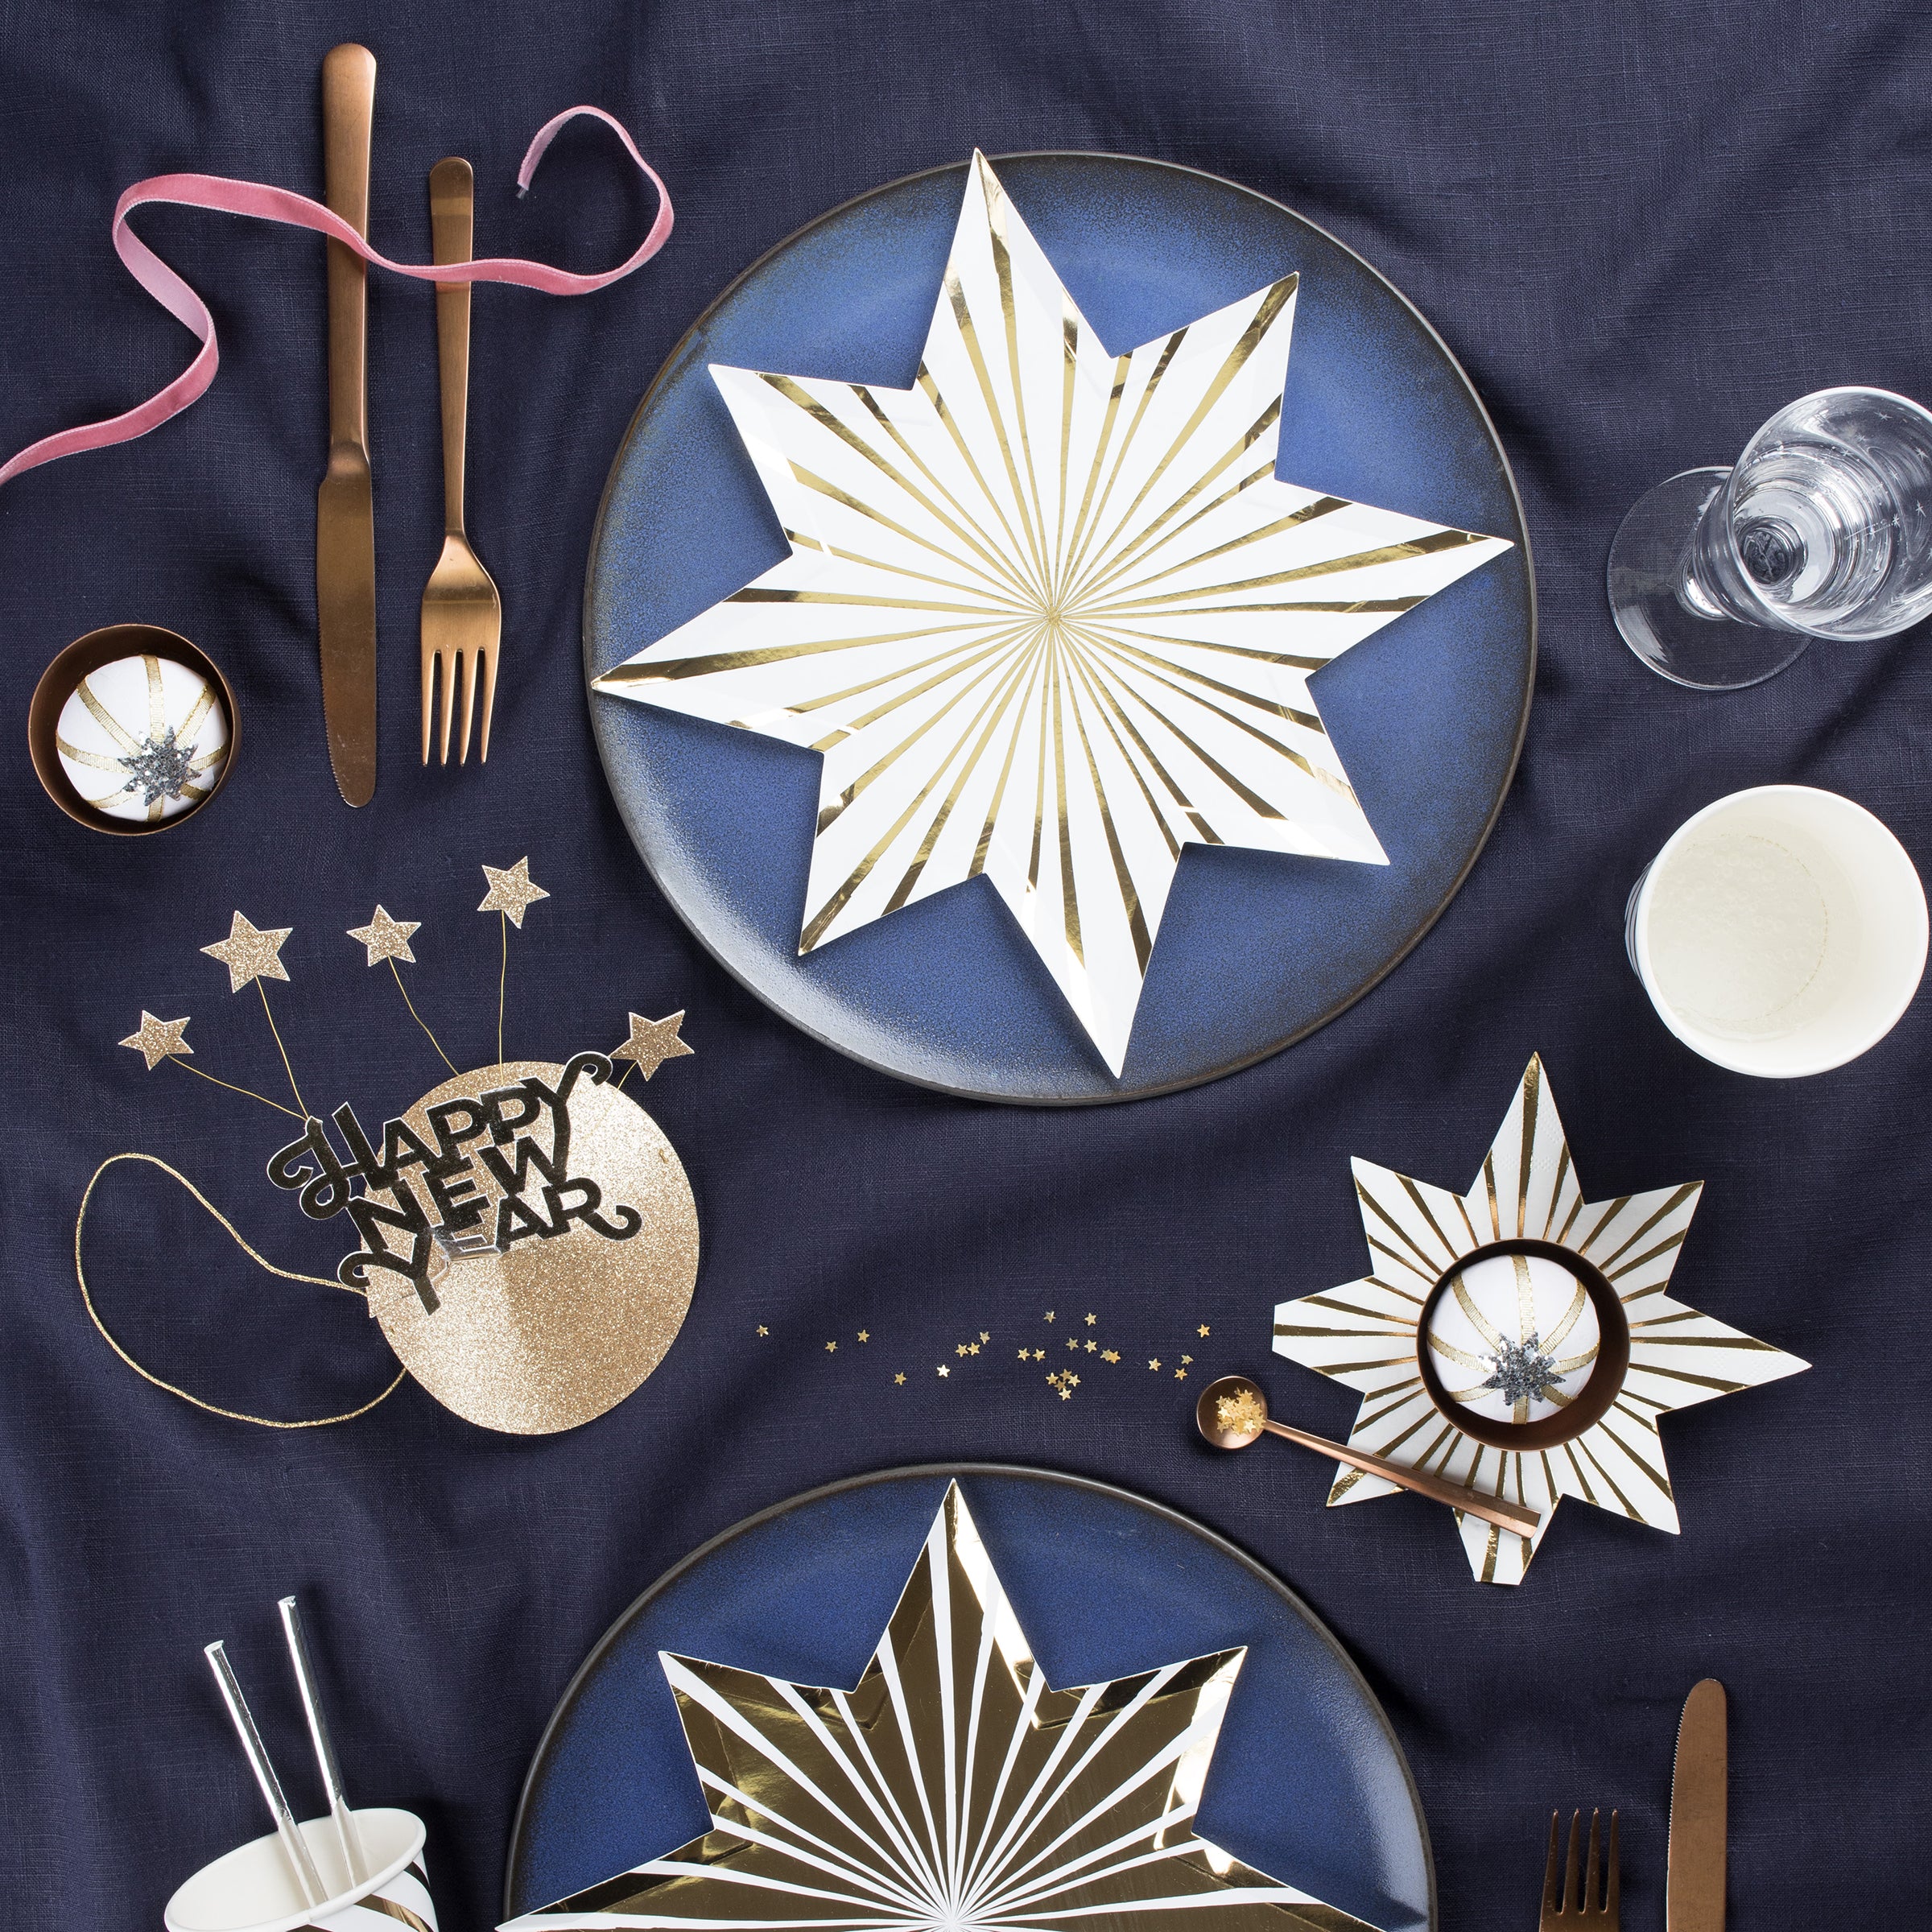 Our shiny gold foil star-shaped plates work beautifully as Christmas plates.